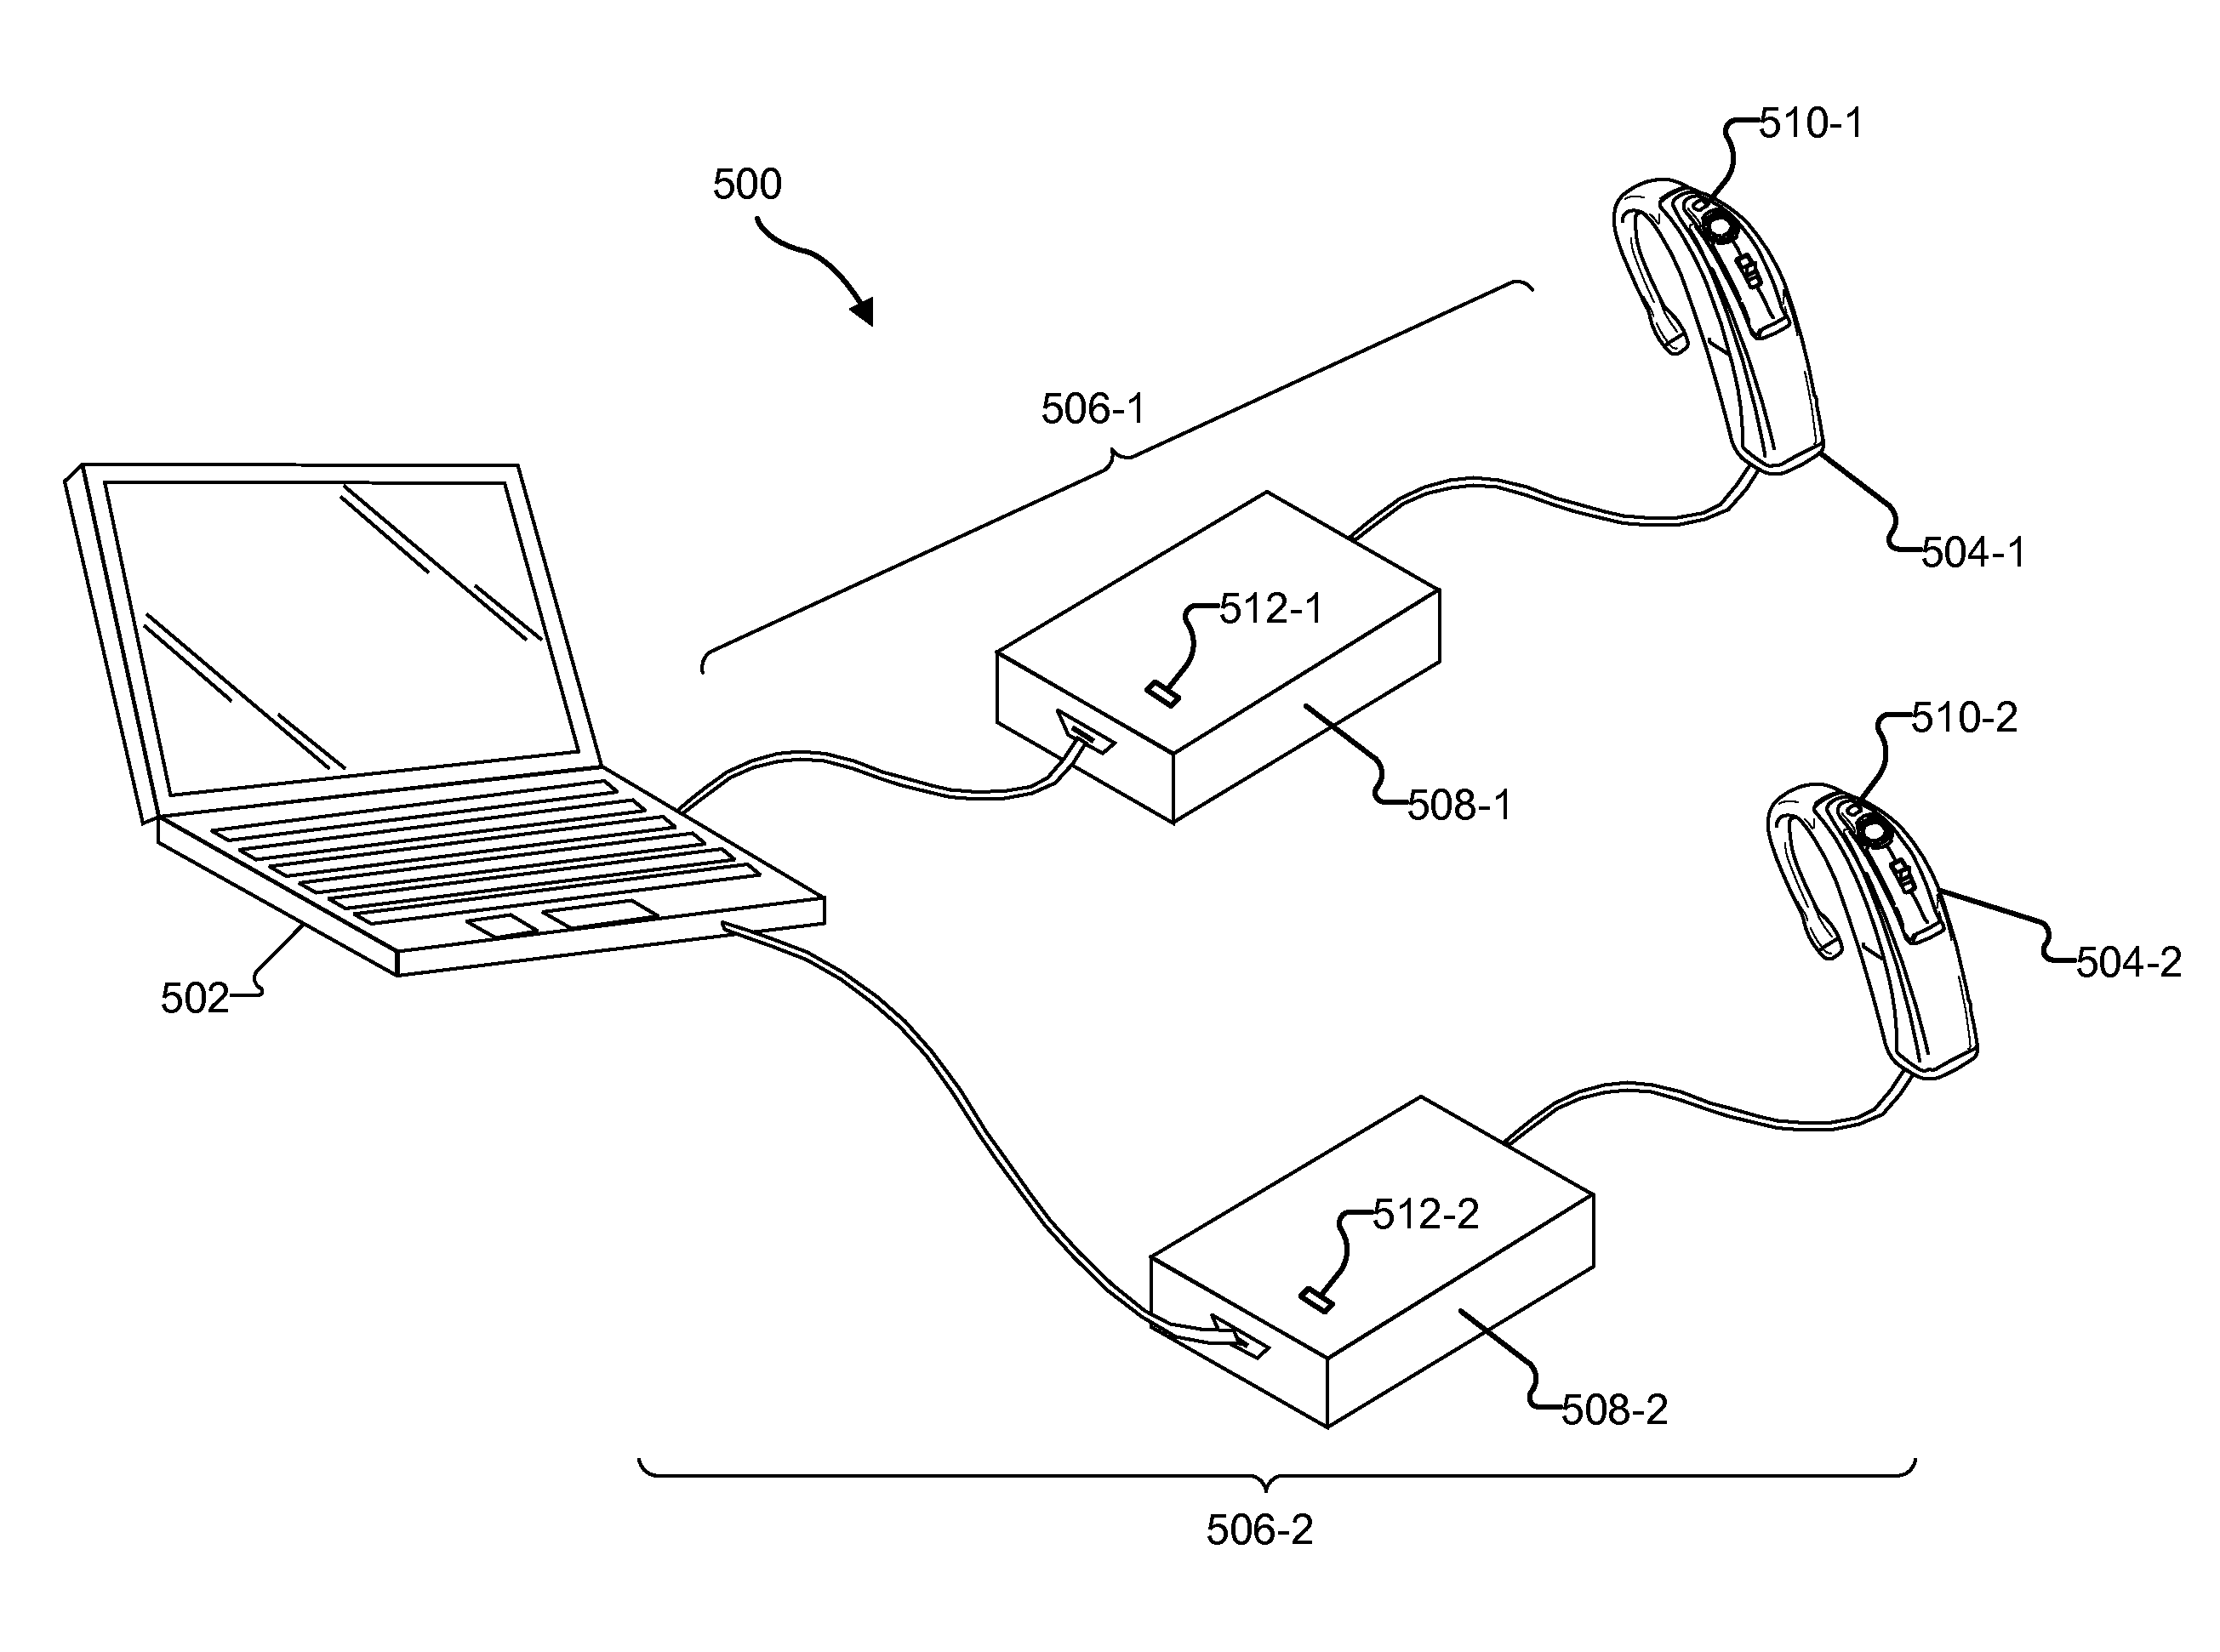 Methods and systems for providing visual cues to assist in fitting a cochlear implant patient